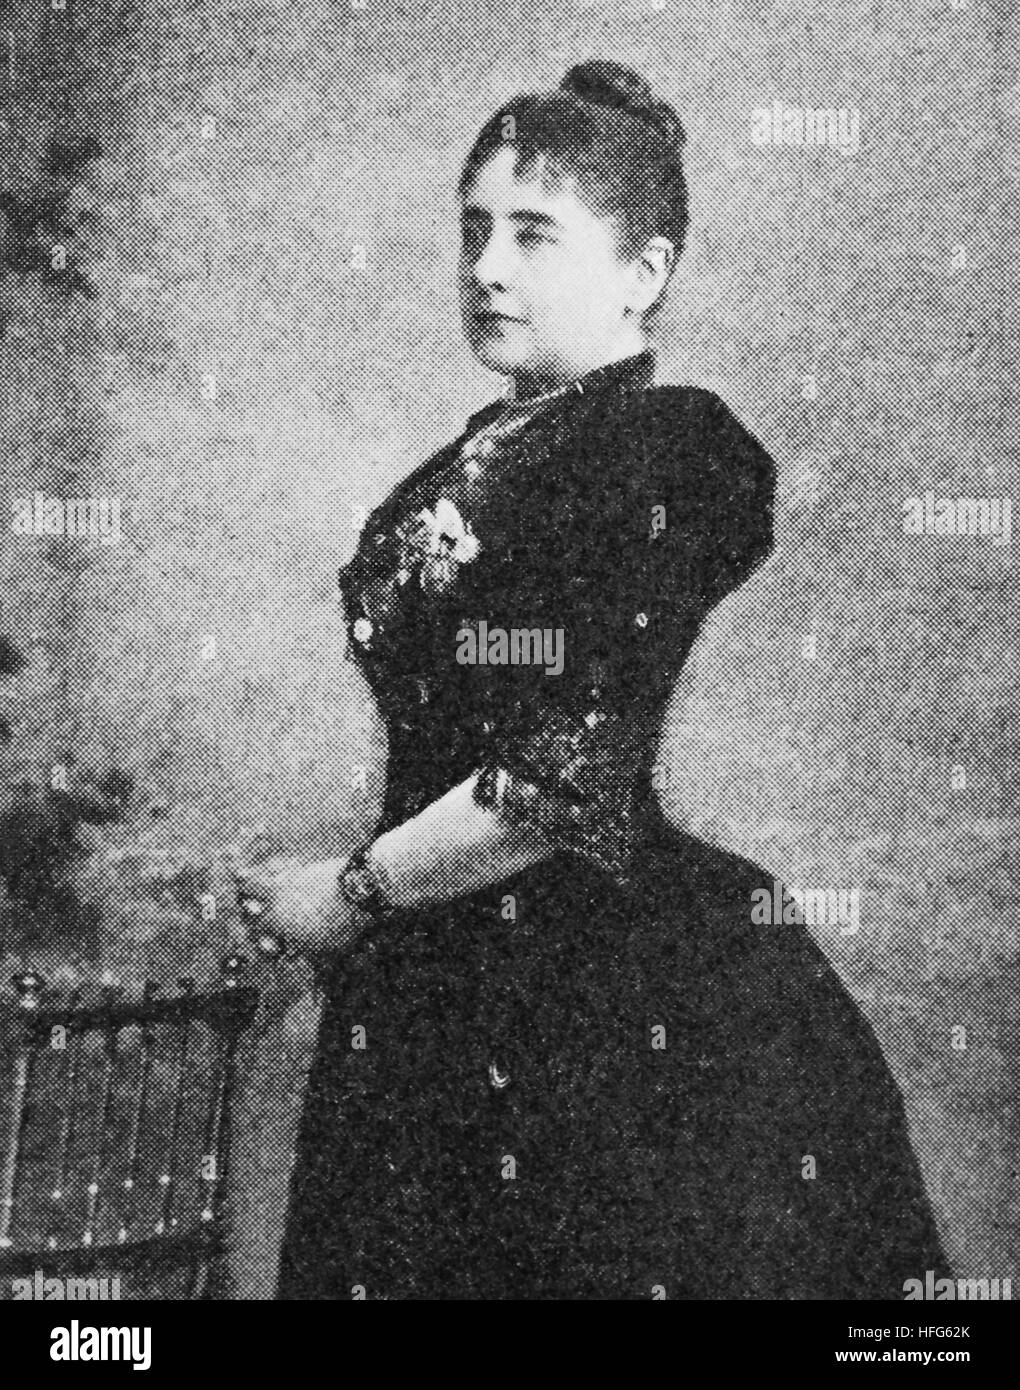 Pauline Lucc, 1841 - 1908, was a prominent operatic soprano, reproduction photo from the year 1895, digital improved Stock Photo